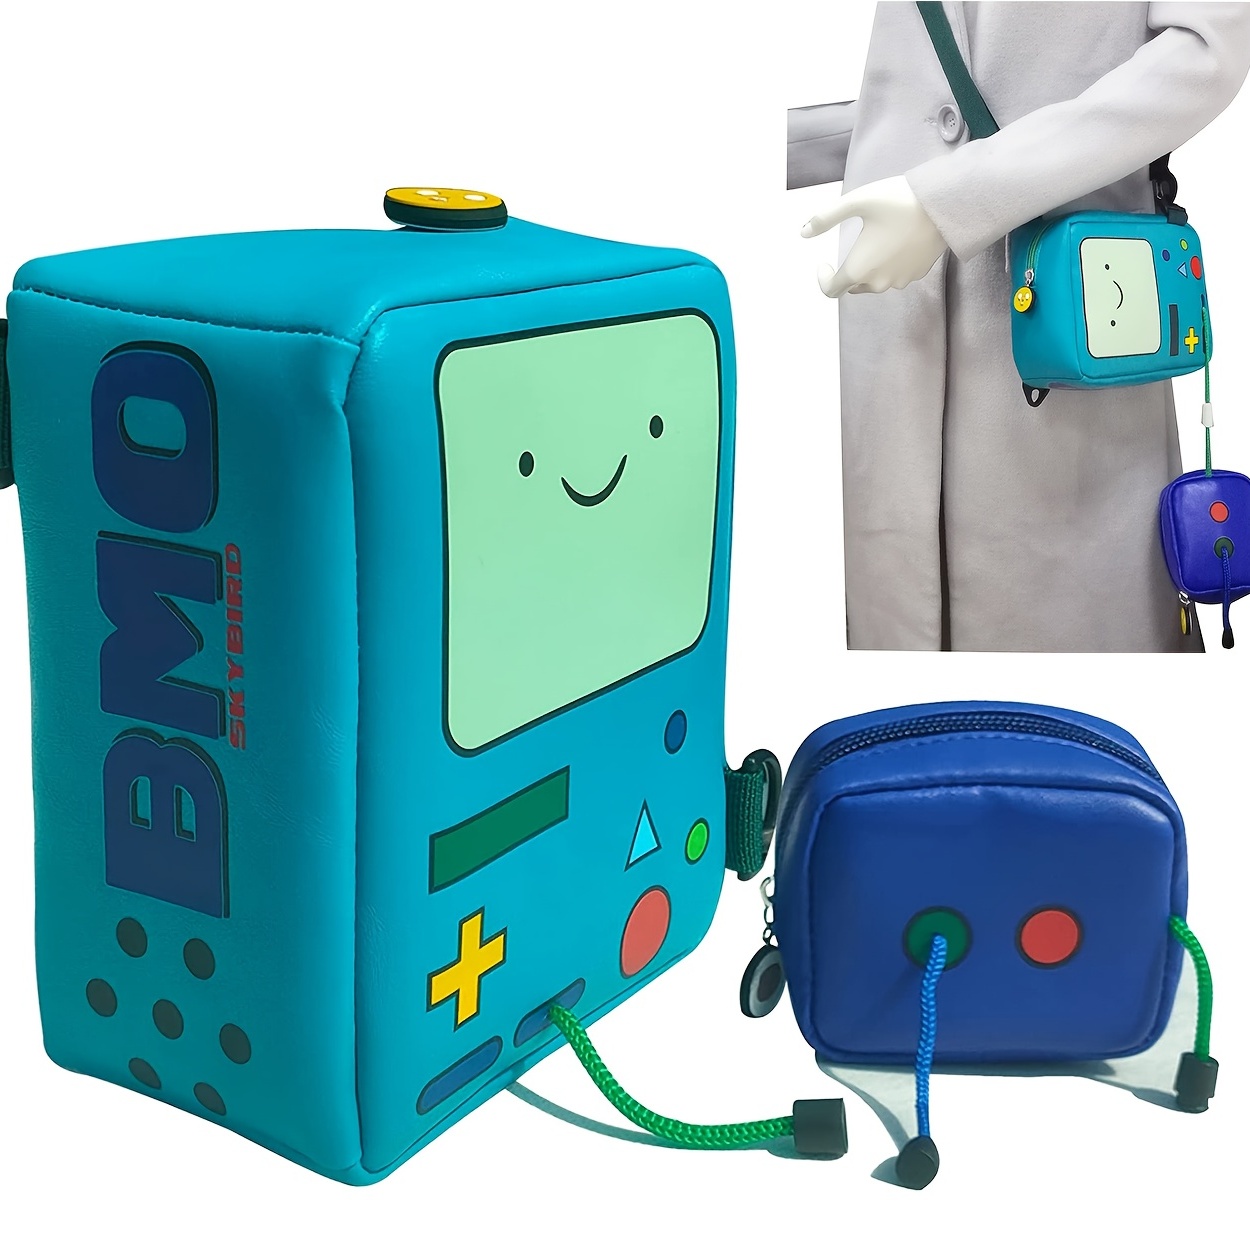 Shop IBSLBMO Cartoon Square Bag - Limited Time Deals!